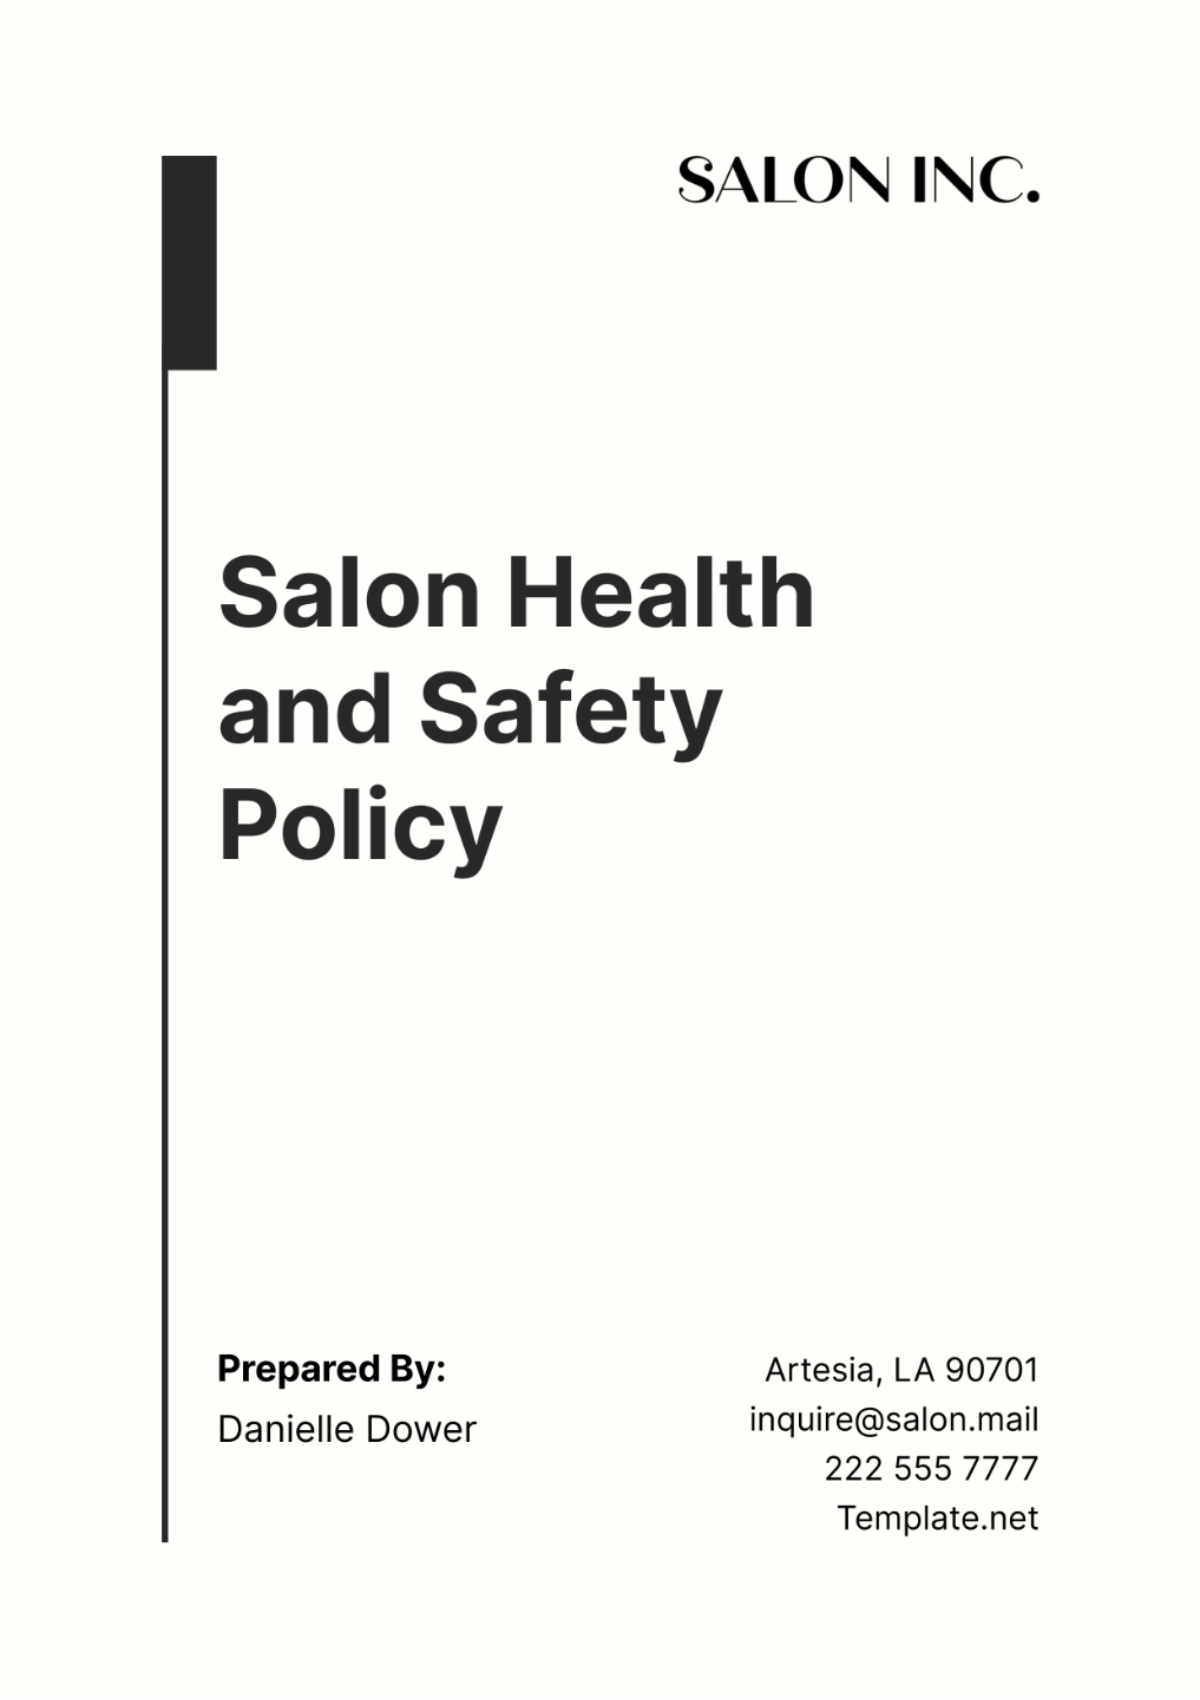 Salon Health and Safety Policy Template